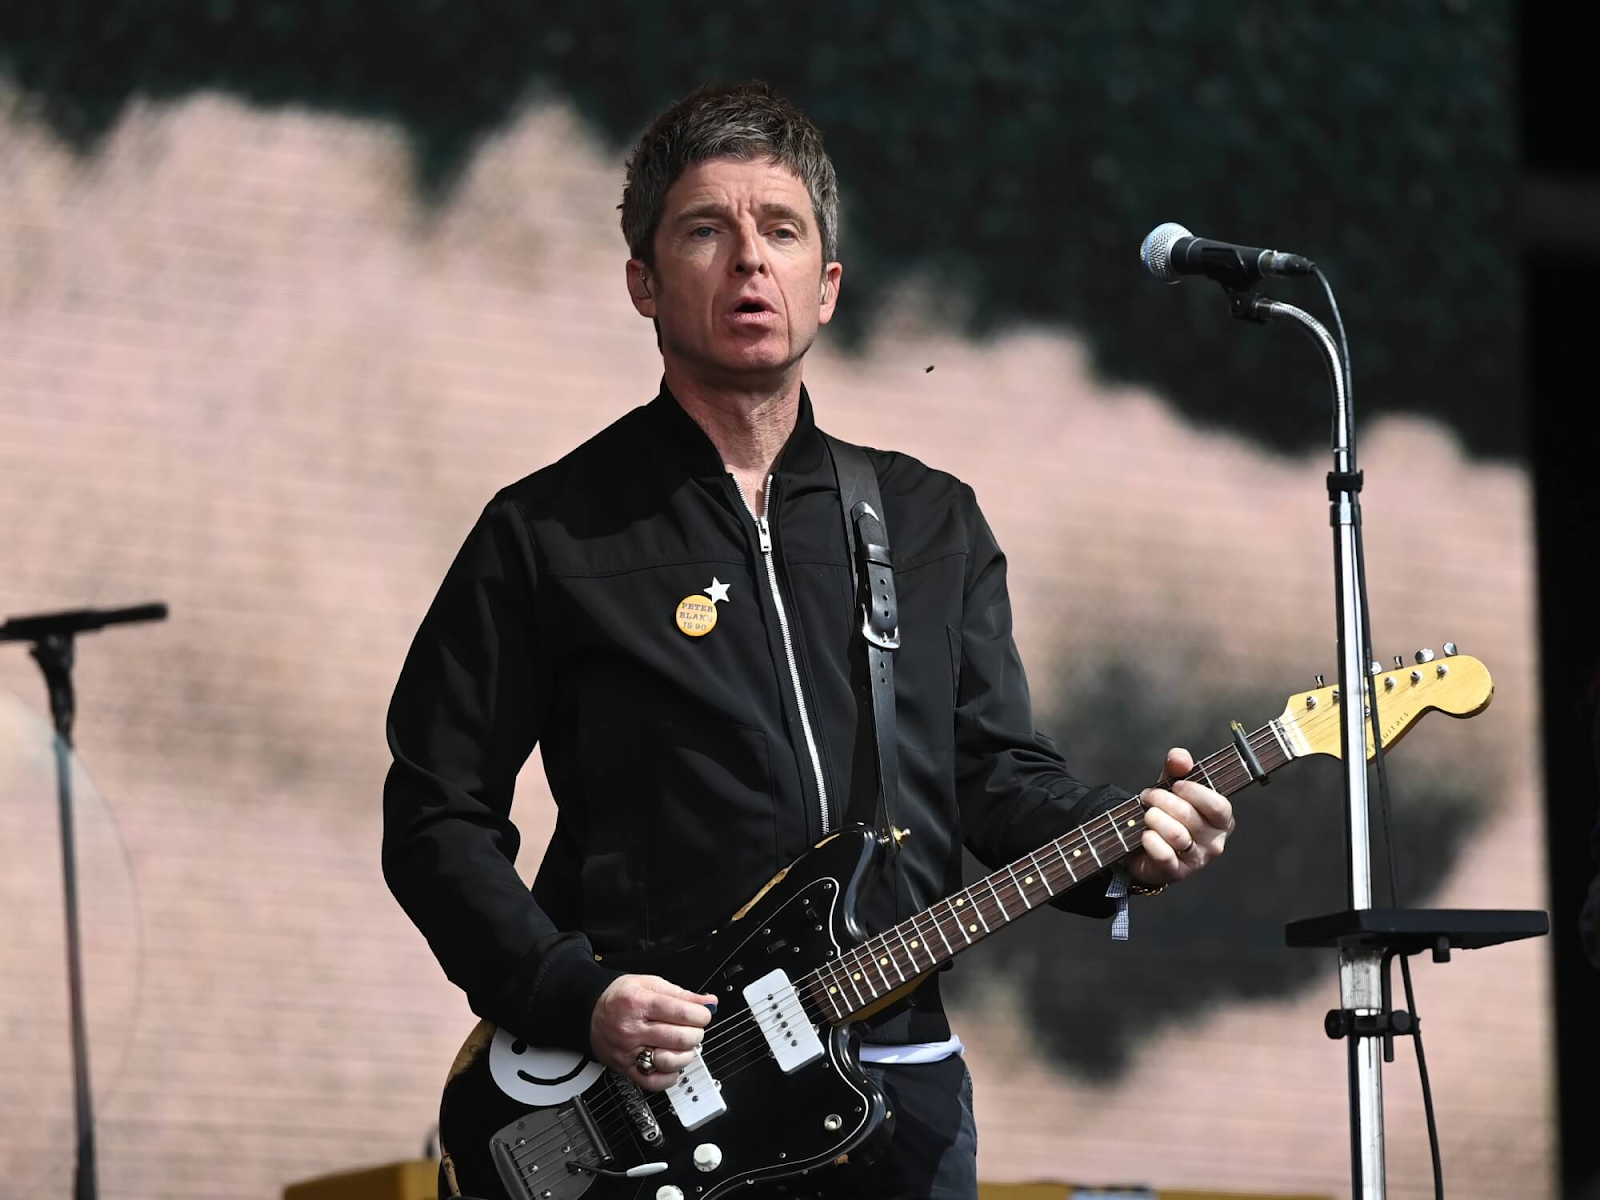 Noel Gallagher says of his songwriting: “I’m not as good as people think I am”